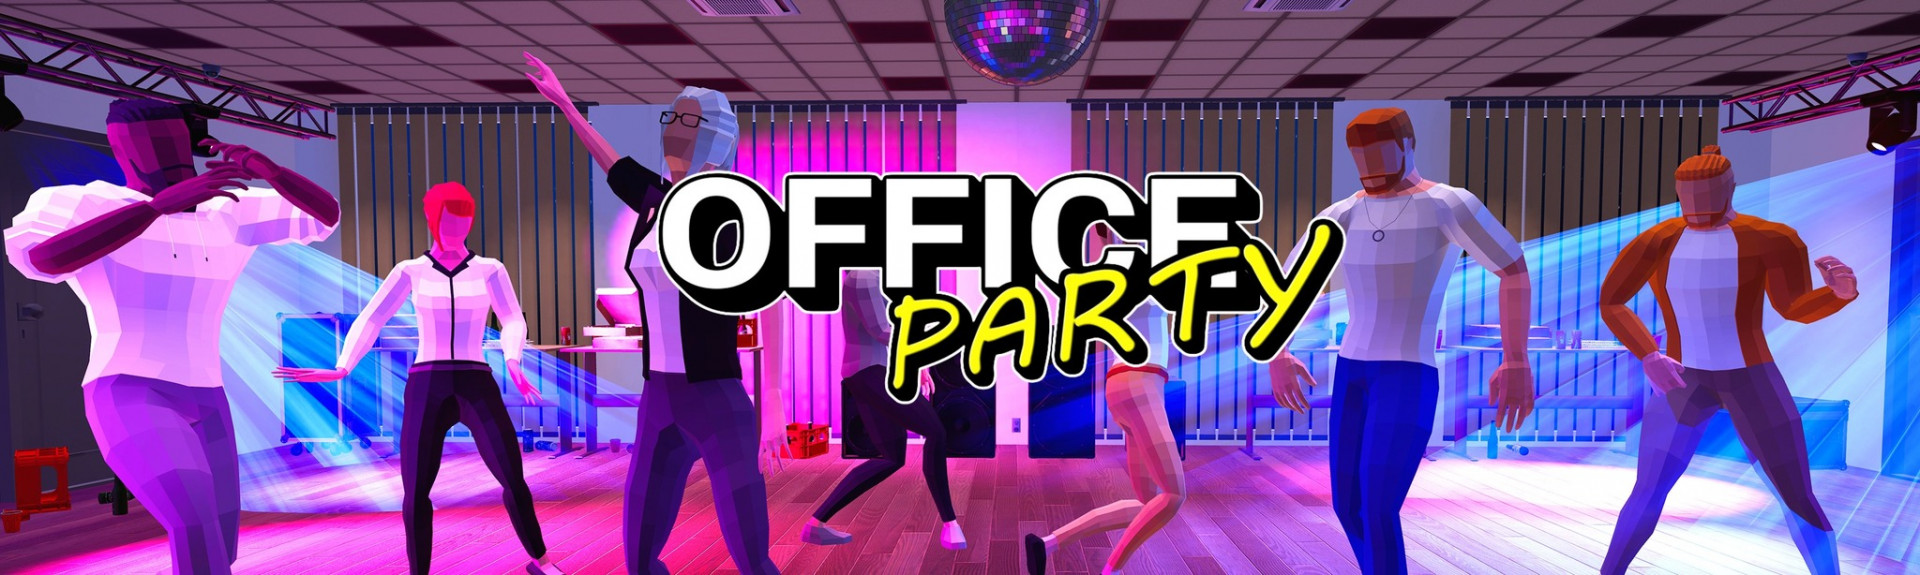 Office Party